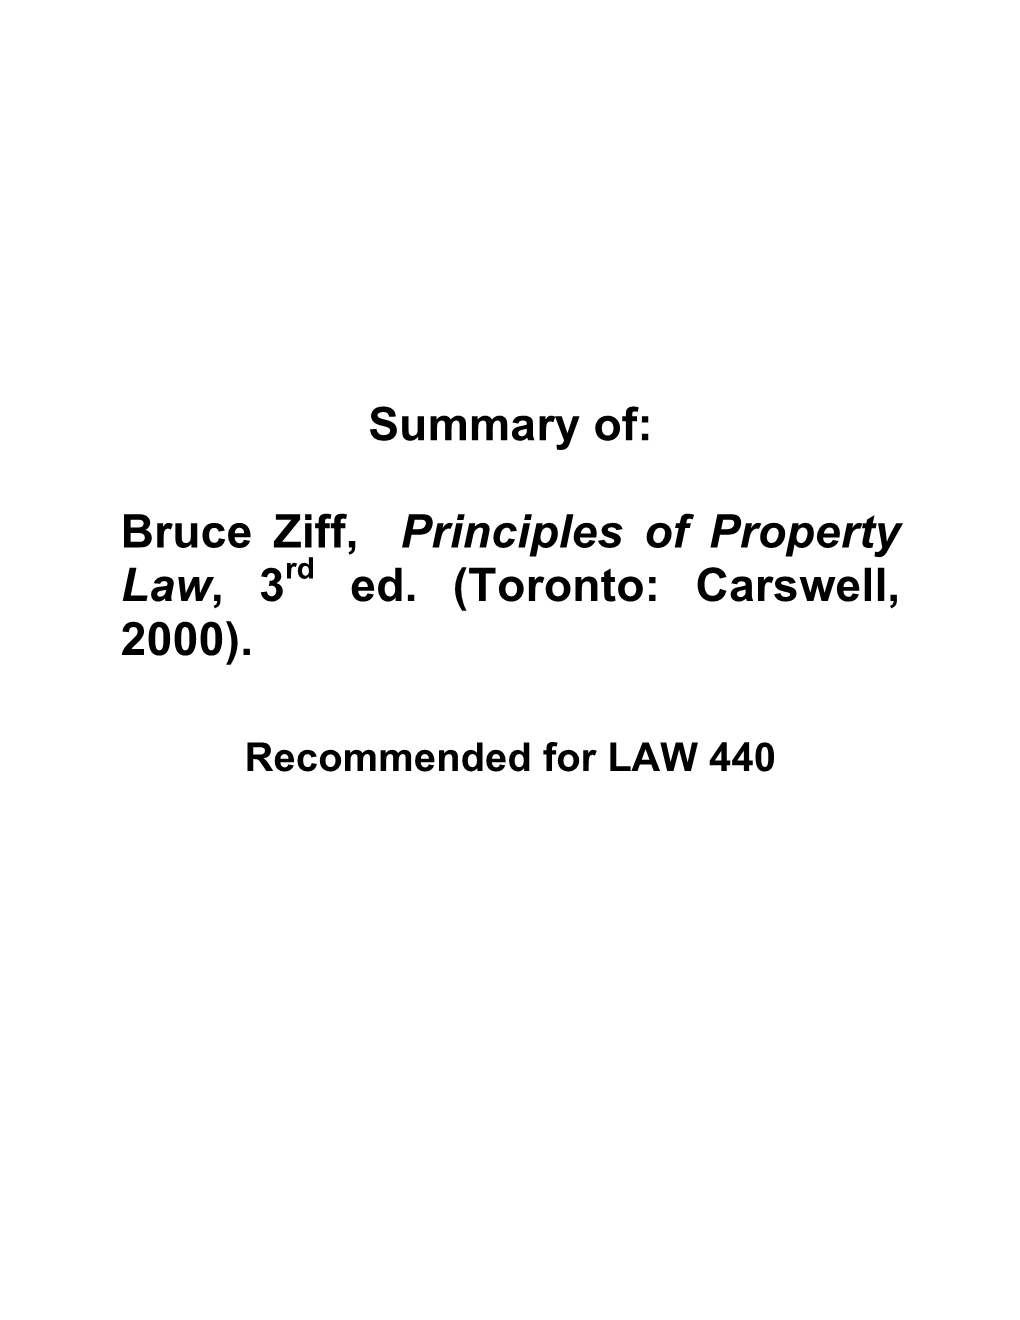 Bruce Ziff, Principles of Property Law, 3Rd Ed